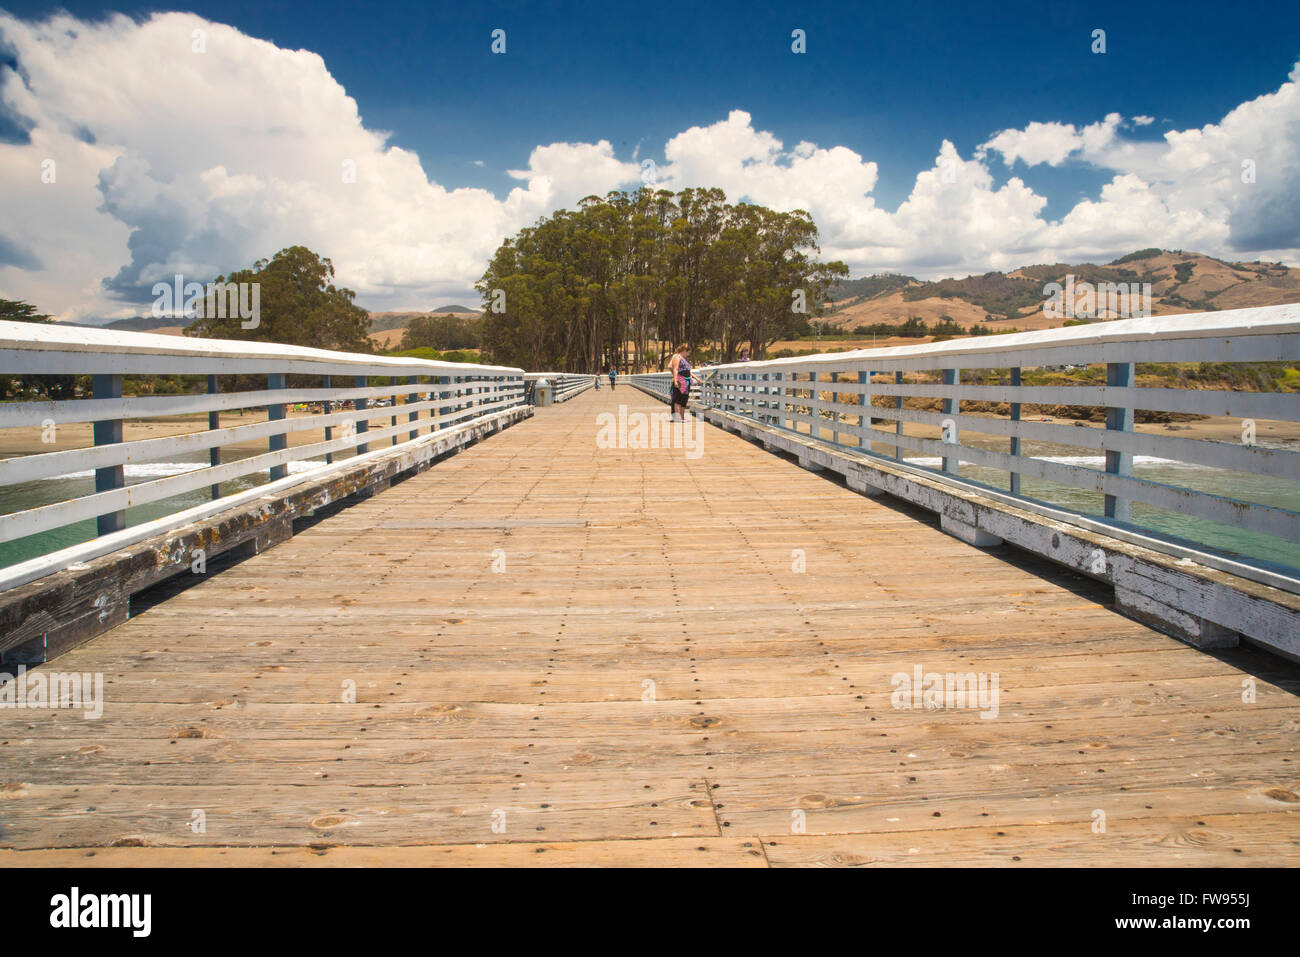 Looking toward shore from end of pier with side rails, under blue sky with white clouds. Stock Photo